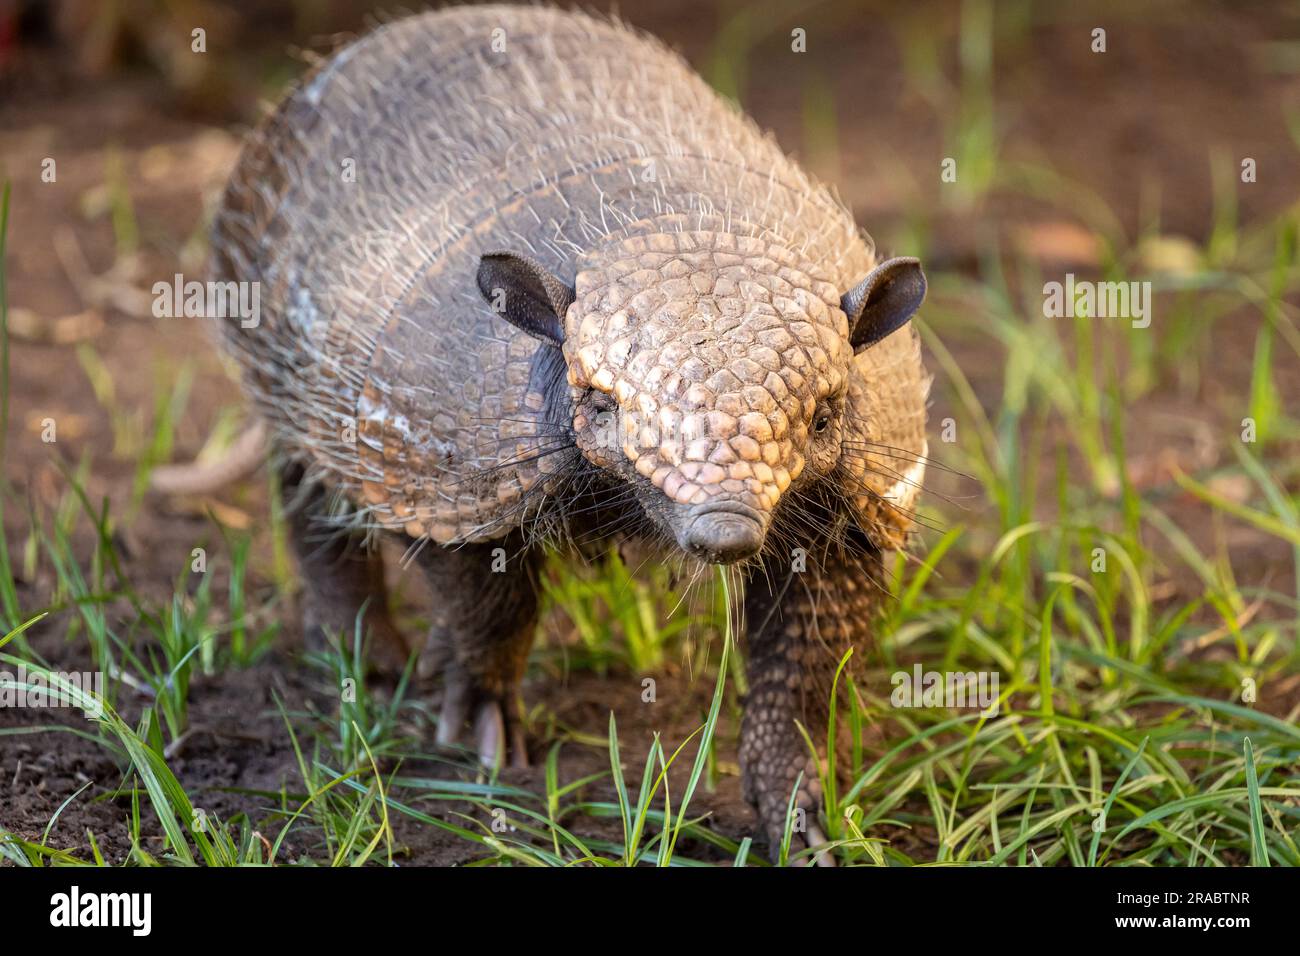 A six-banded armadillo ( Euphractus sexcinctus) forages for insects, ants, carrion, and plant material in the remote and wild Pantanal of Brazil. Stock Photo